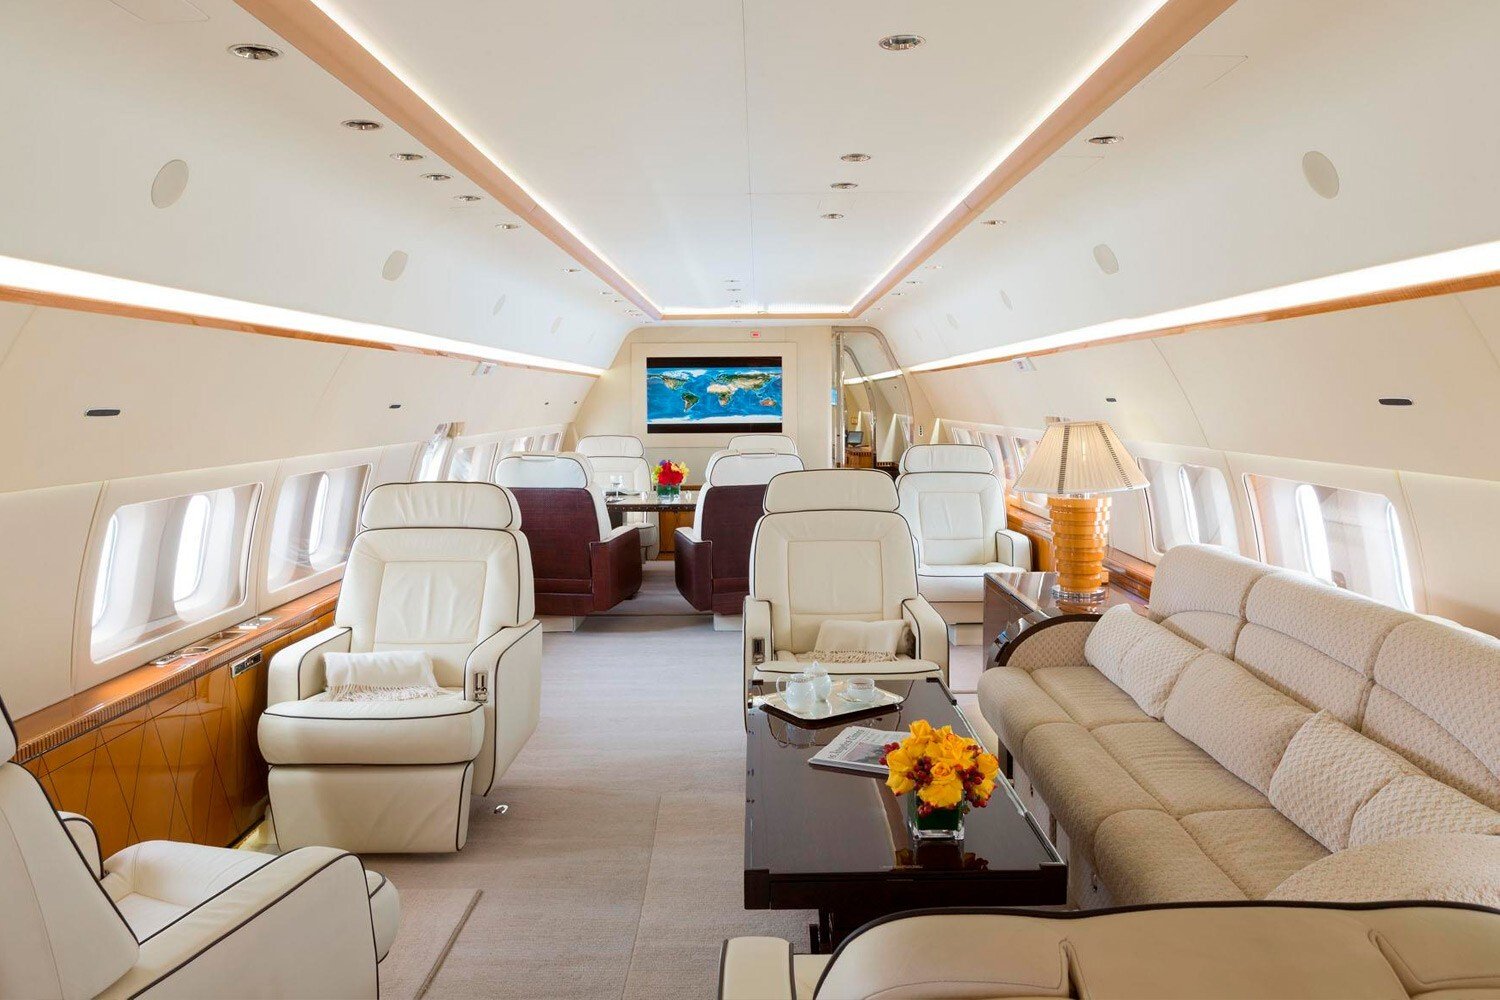 Mercedes Dreams Up a Swanky Interior for Private Jets | WIRED